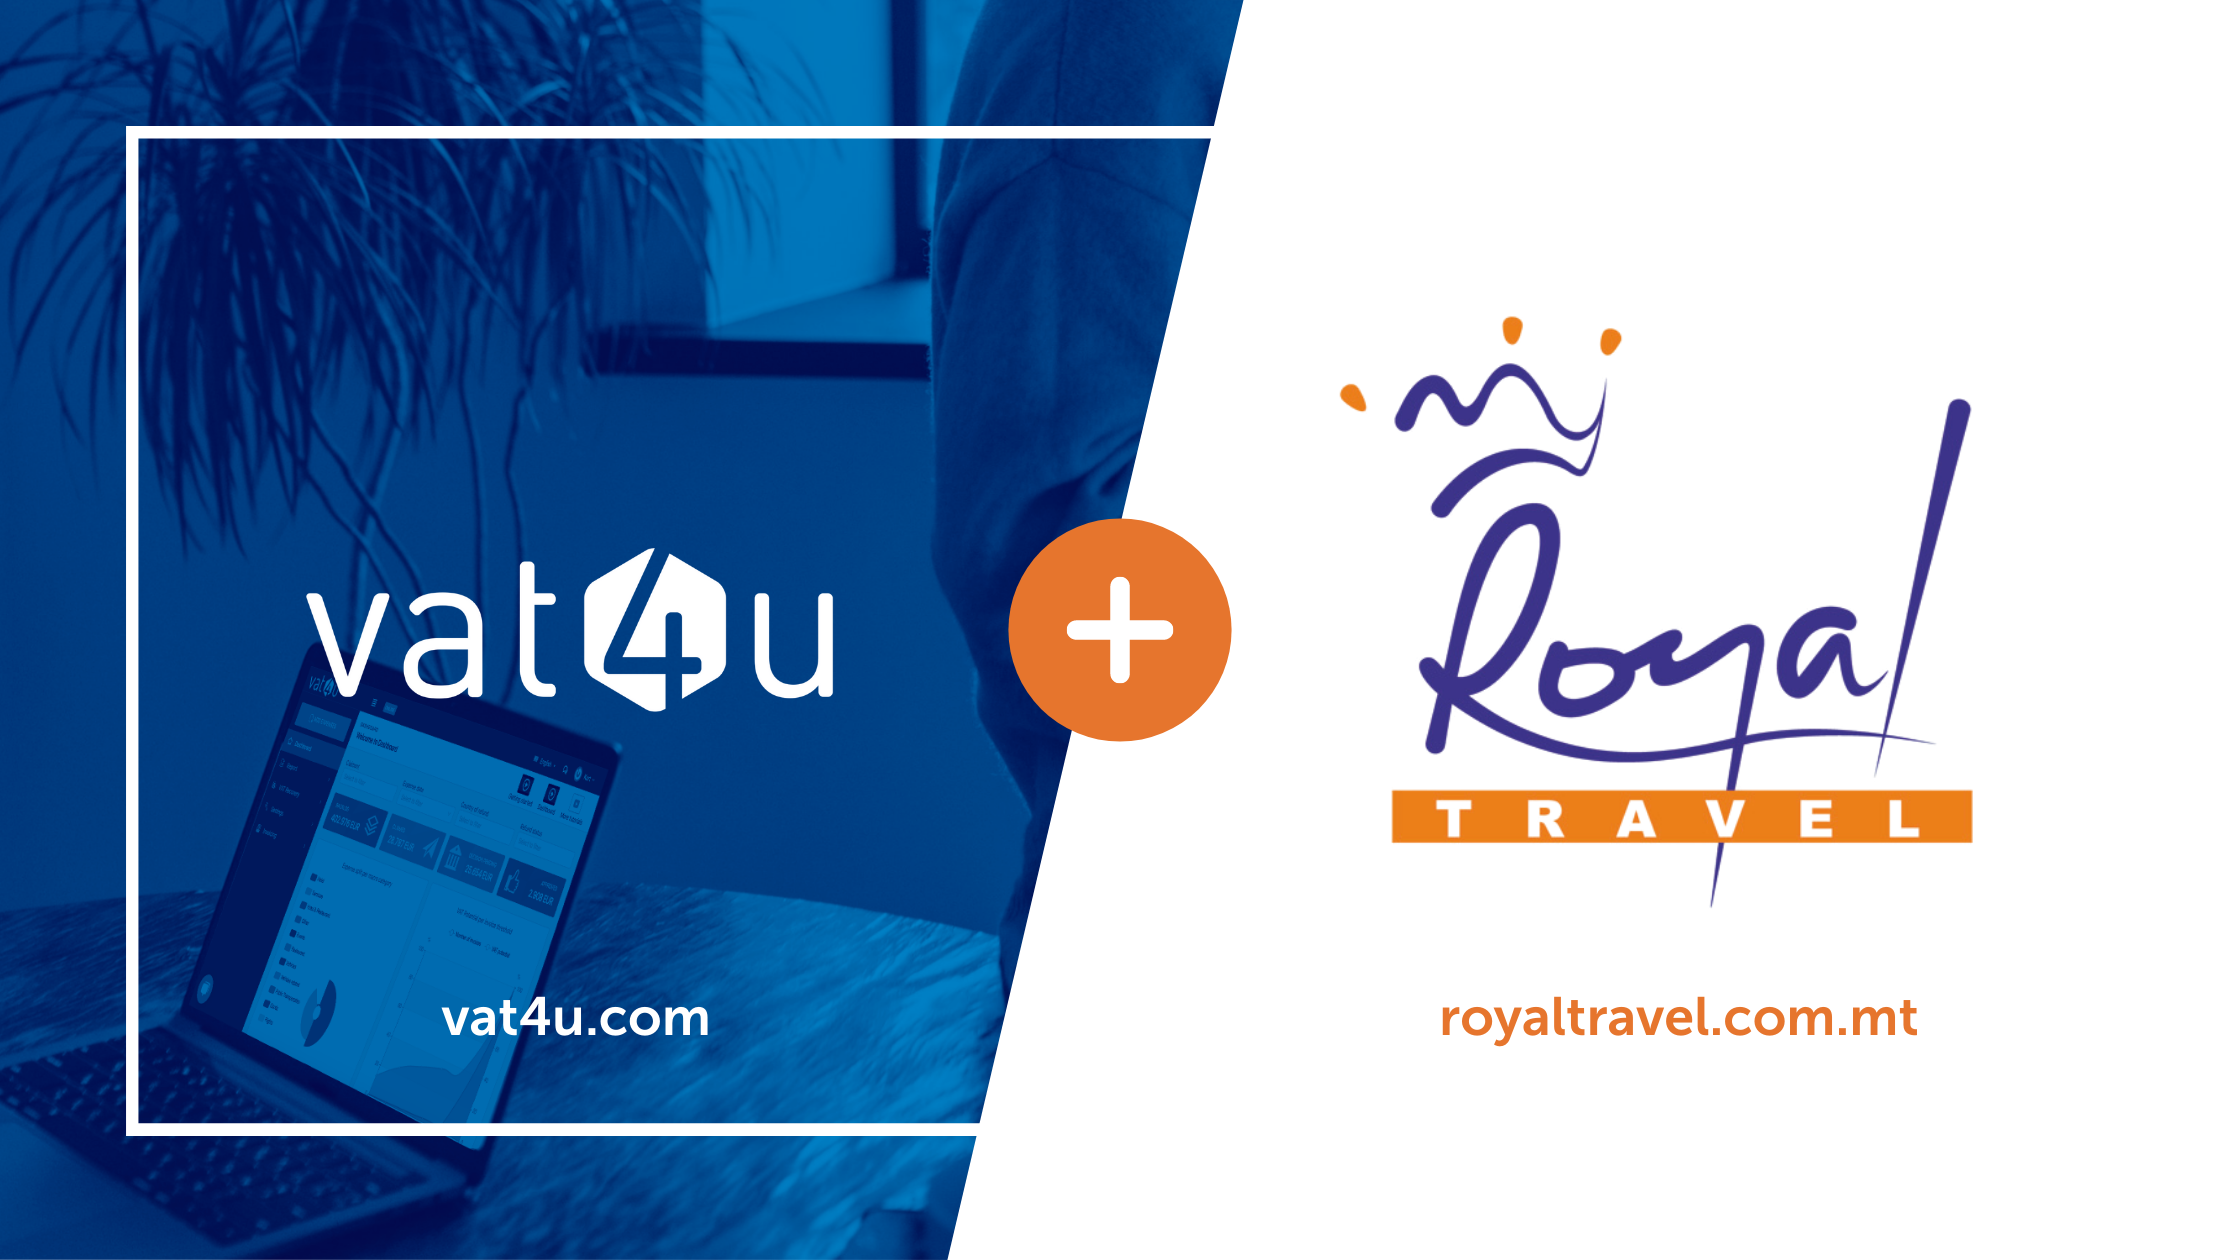 Redefining Business Trips with Royal Travel